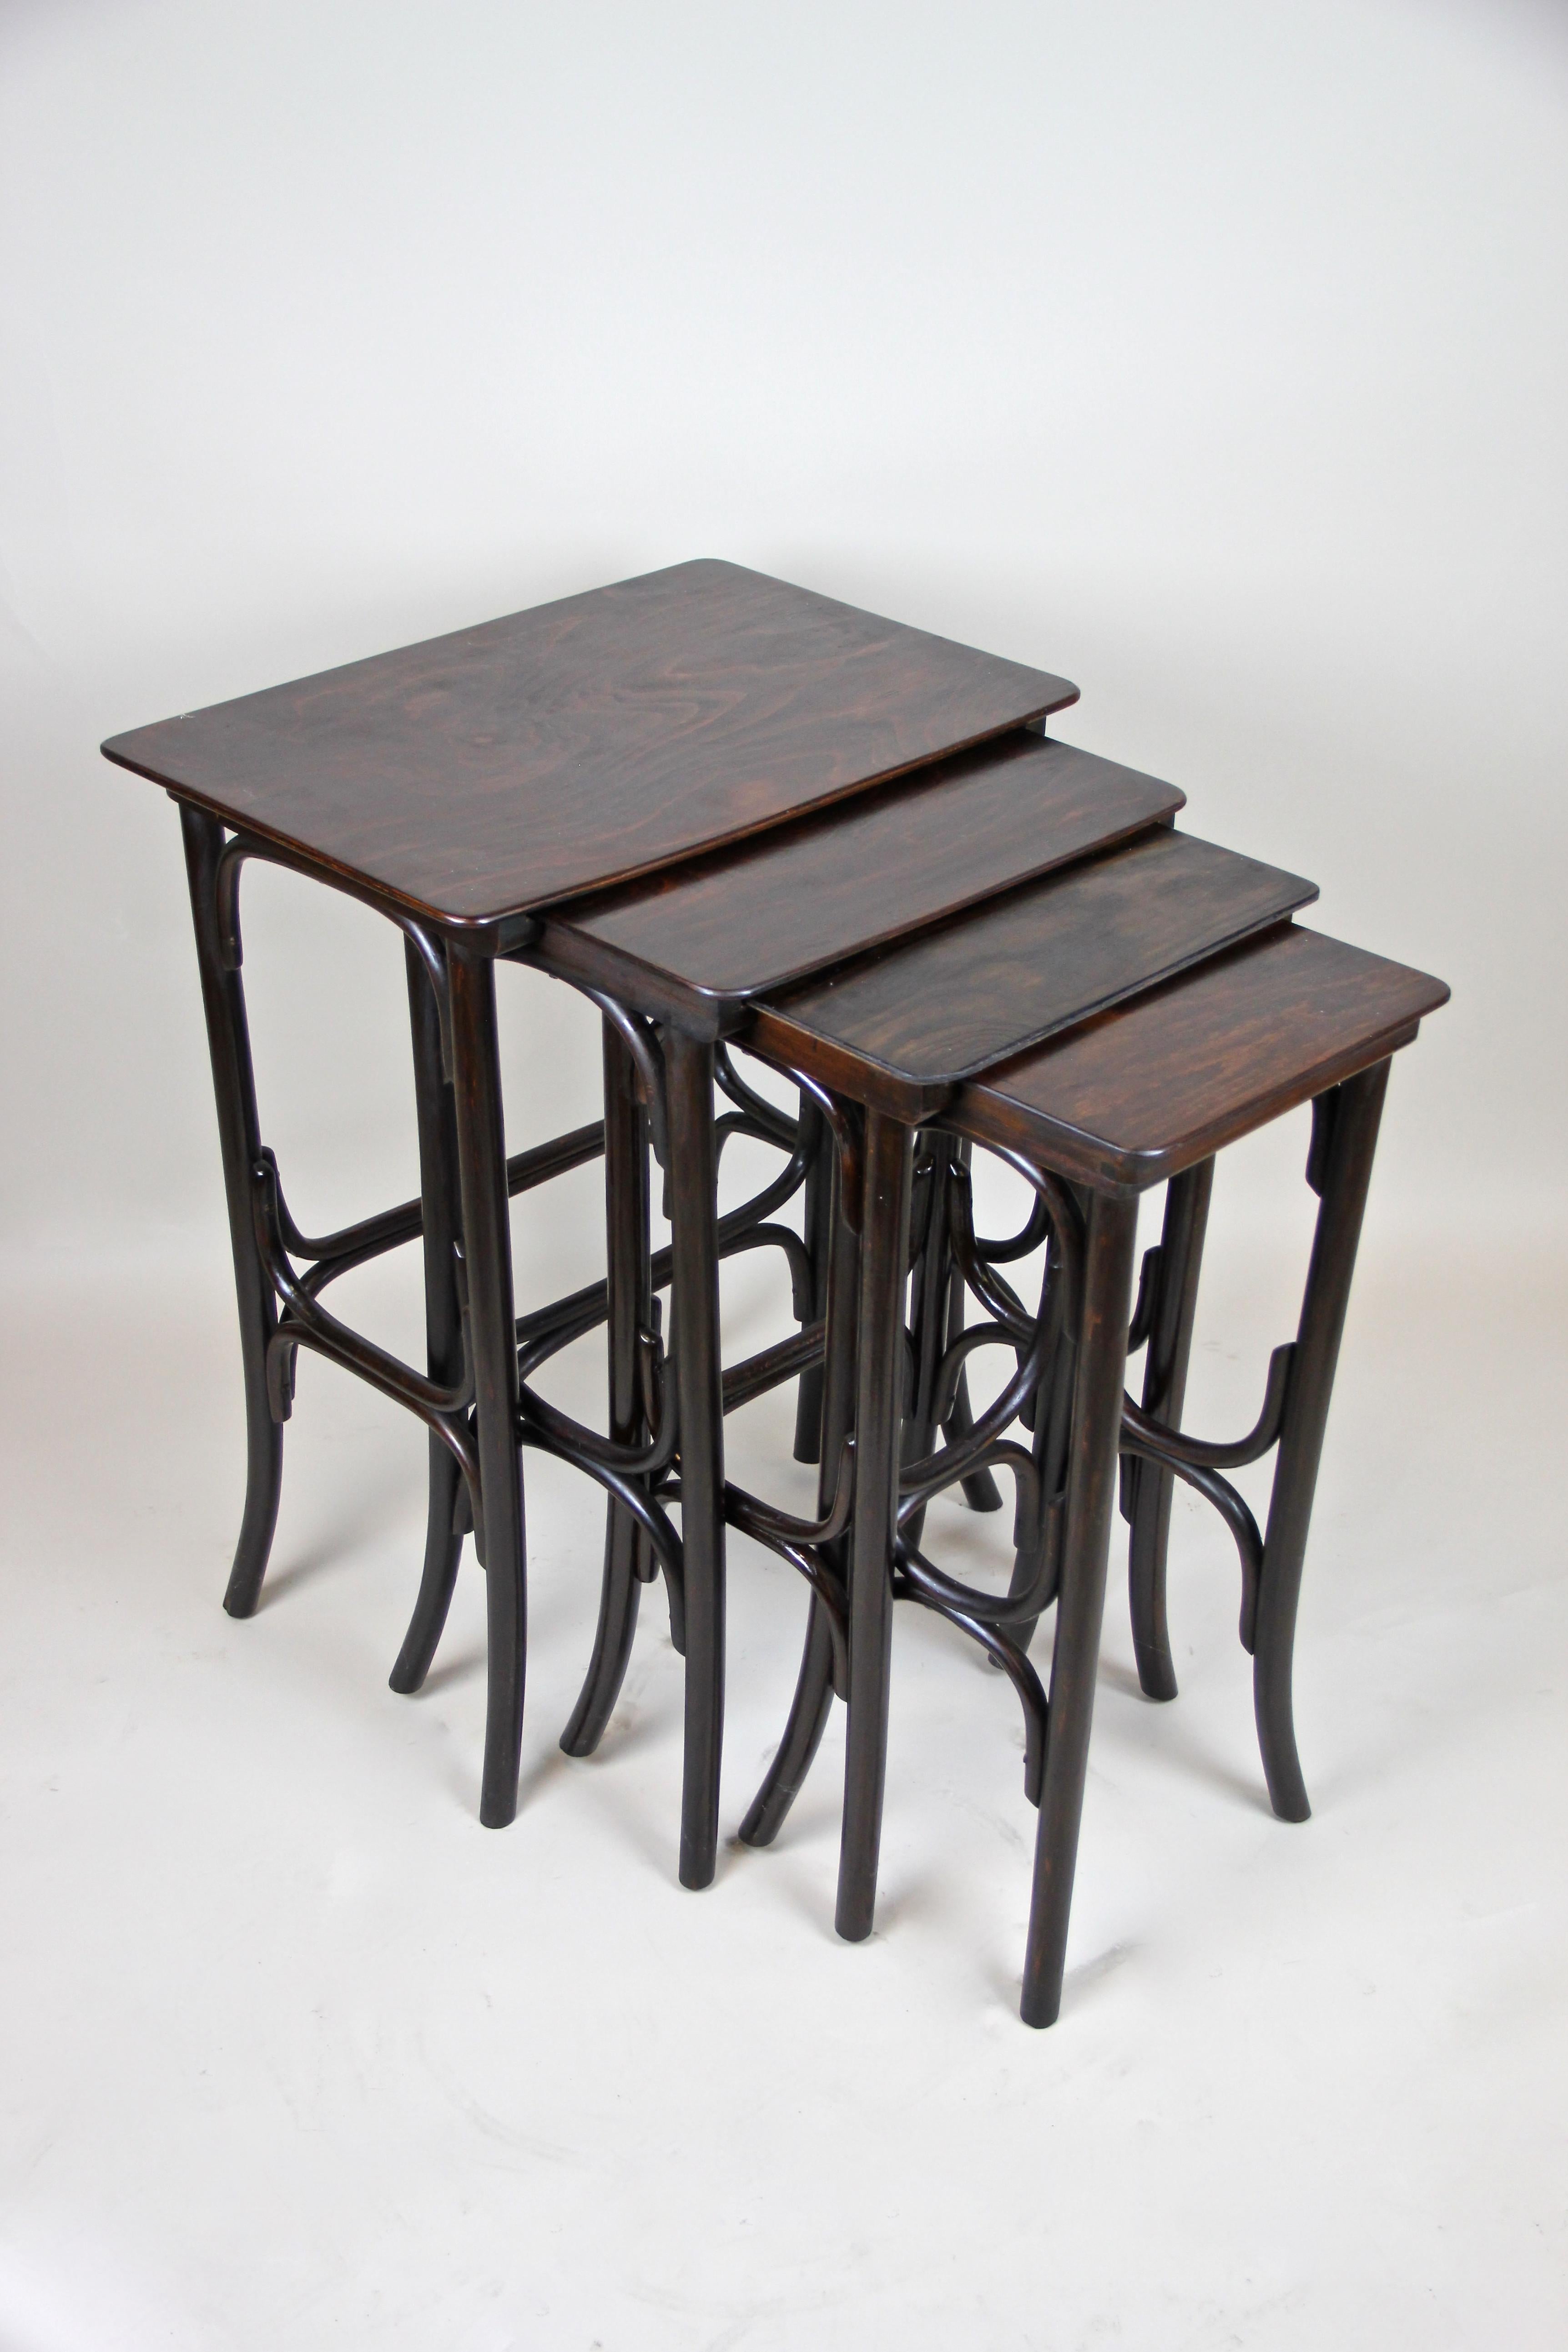 Lovely set of four bentwood nesting tables from the Art Nouveau period circa 1905 made by the world famous manufacture of Thonet. The Mod. No. 10 was beautifully made of bent beechwood and trimmed to a very dark mahogany tone. This great Thonet